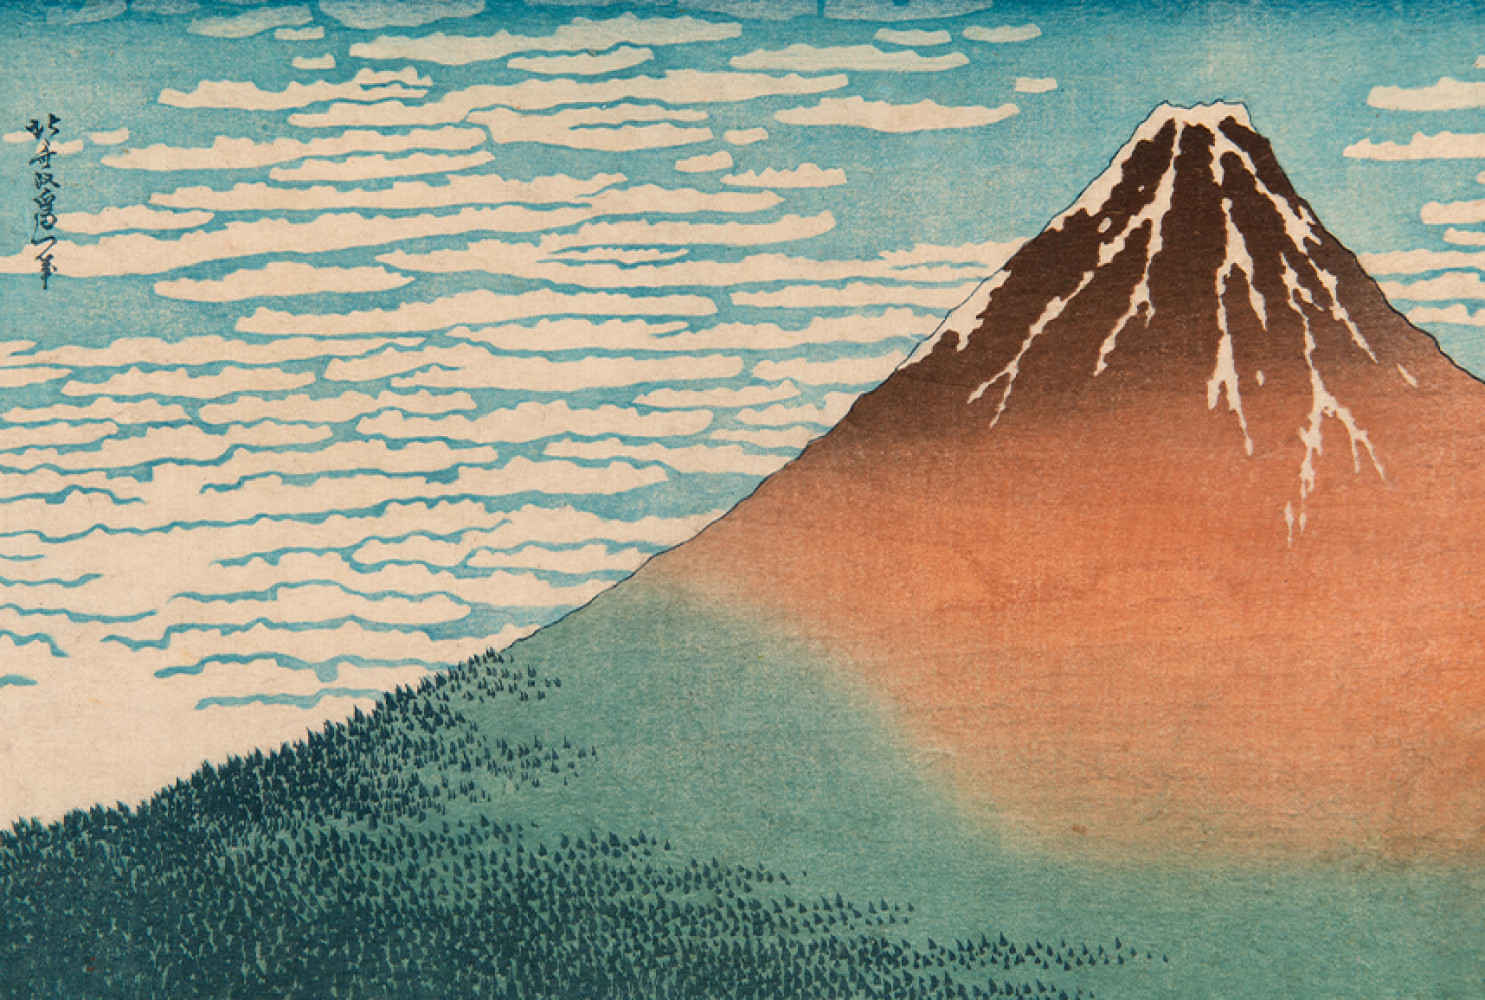 KATSUSHIKA HOKUSAI (1760 - 1849)
South Wind, Clear Dawn (Red Fuji) from the series Thirty-six Views of Fuji, ca. 1831 - 33. Color woodblock print, 10 x 15 inches. Image courtesy of Gibbes Museum of Art 
